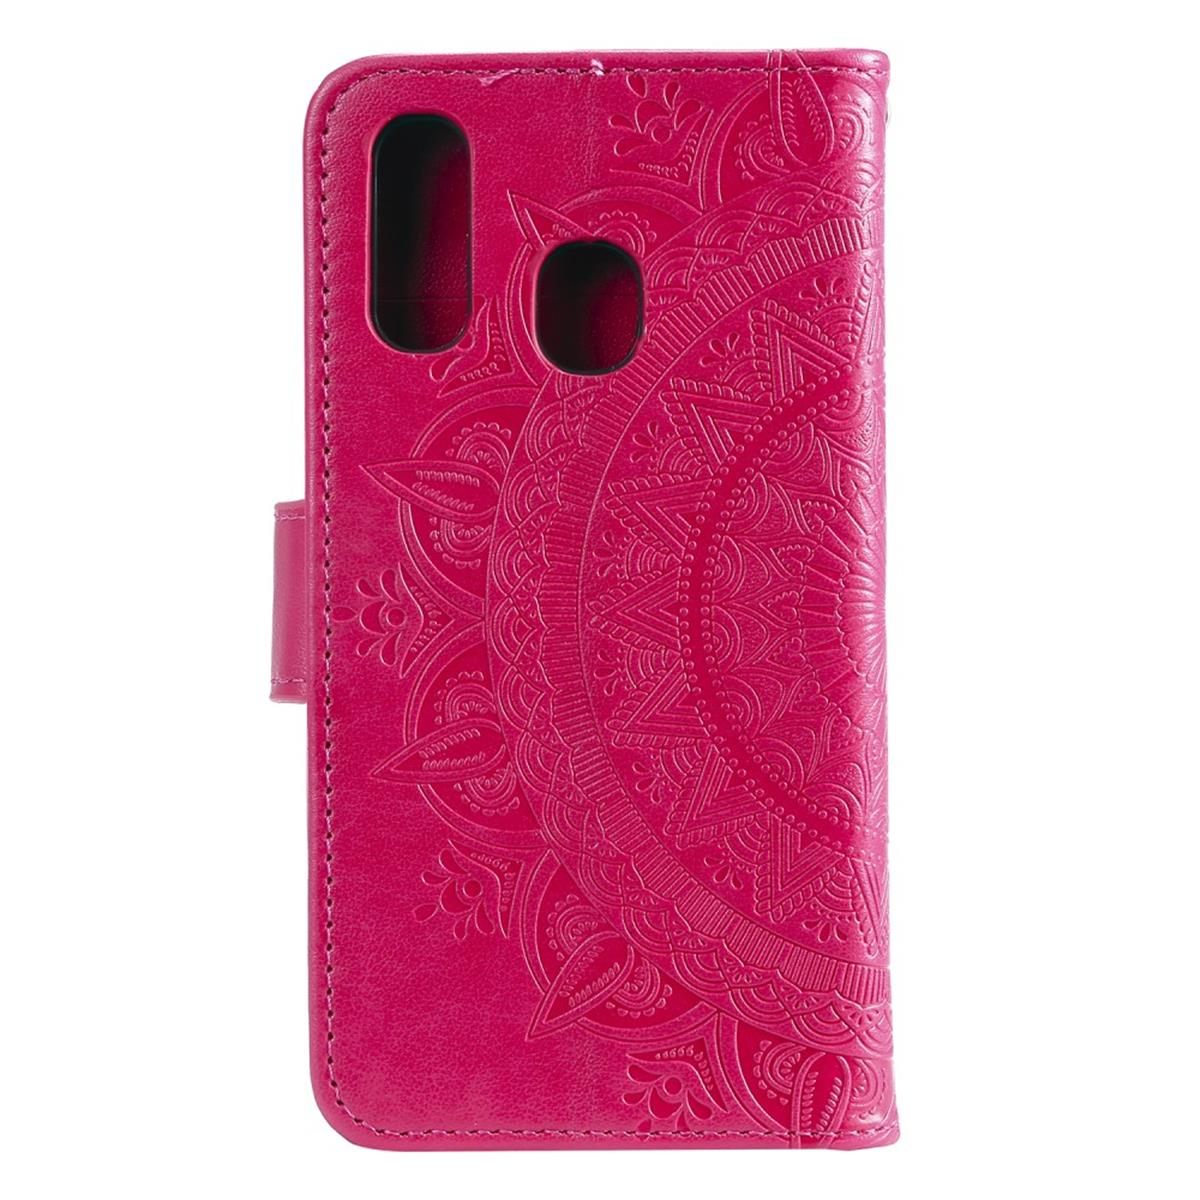 COVERKINGZ Klapphülle mit Mandala Muster, Samsung, Galaxy A40, Pink Bookcover